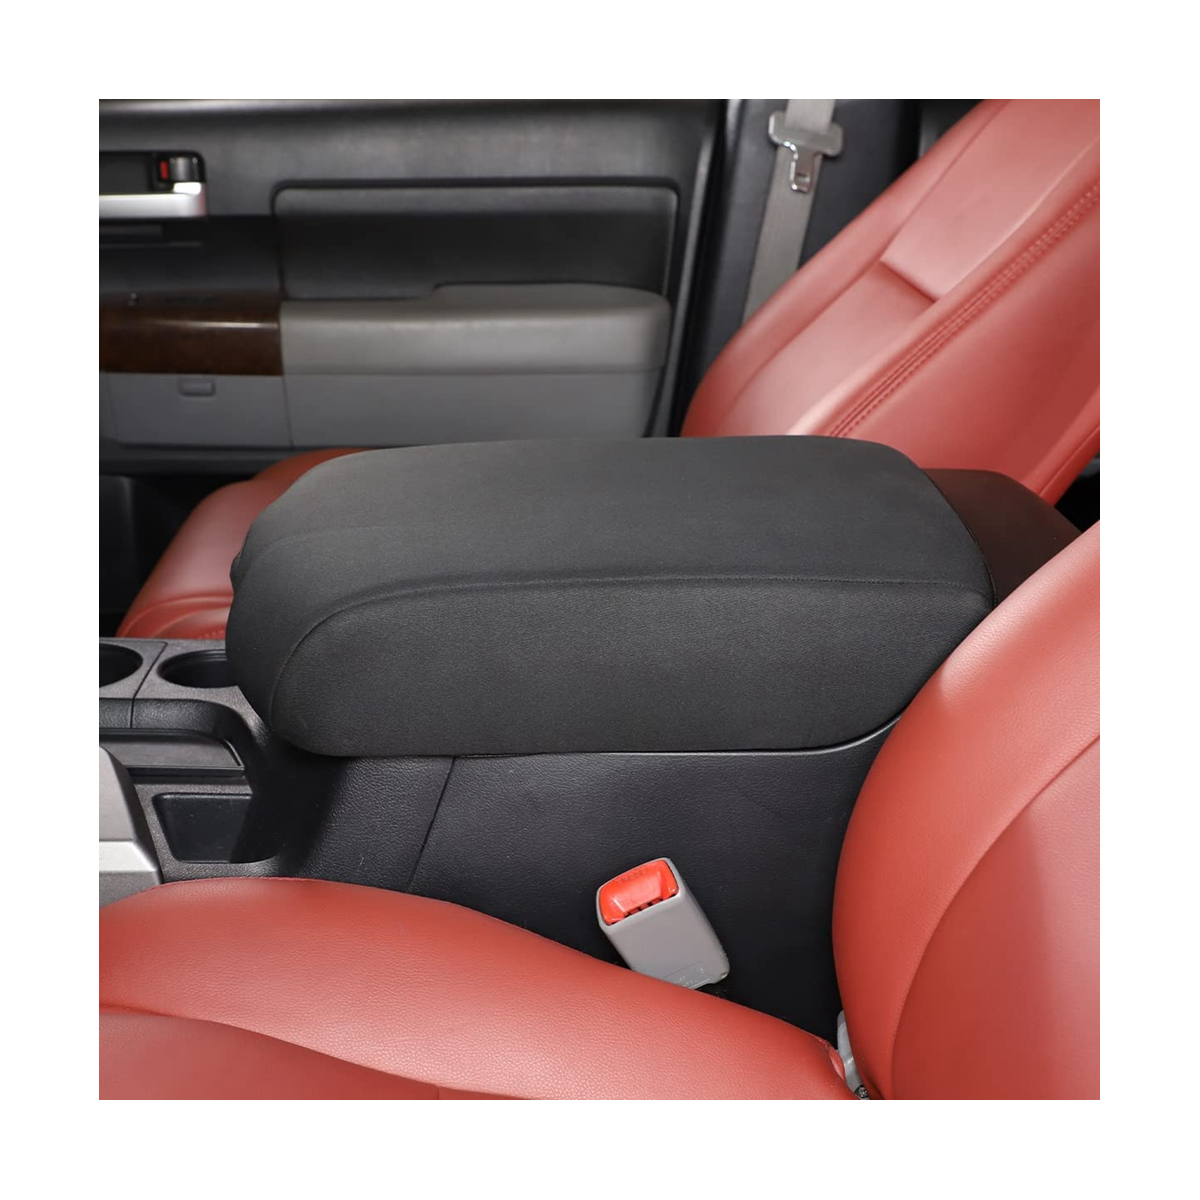 For Toyota Tundra 2007 2008 2009 2010 2011 2012 2013 Car Center Seat Armrest Box Protective Cover Accessories - Black